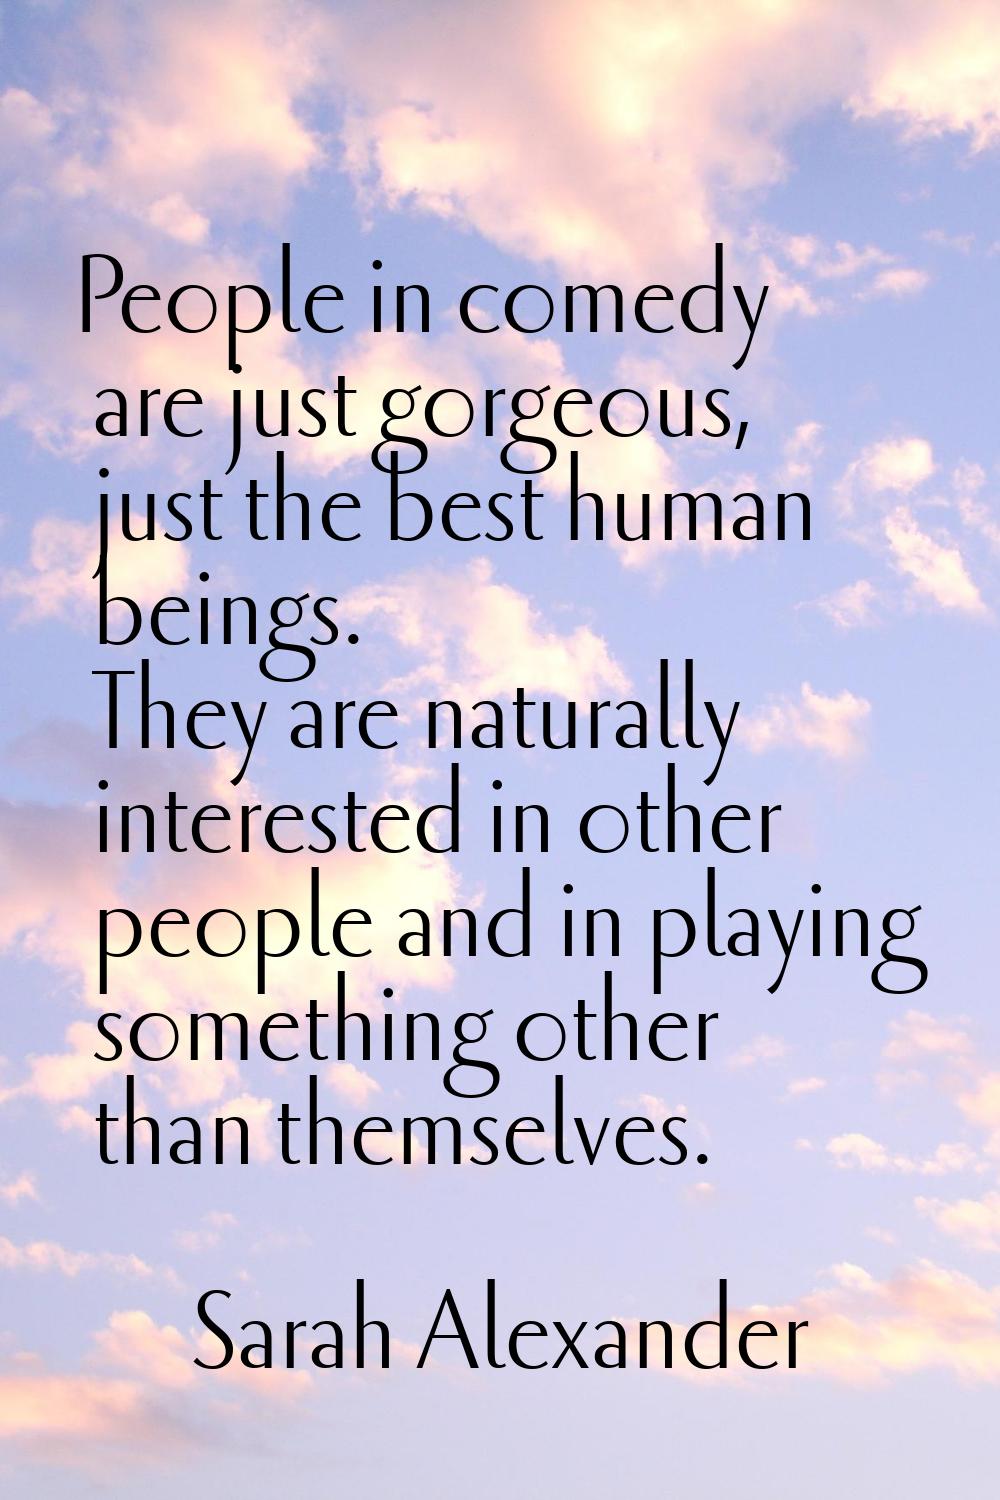 People in comedy are just gorgeous, just the best human beings. They are naturally interested in ot